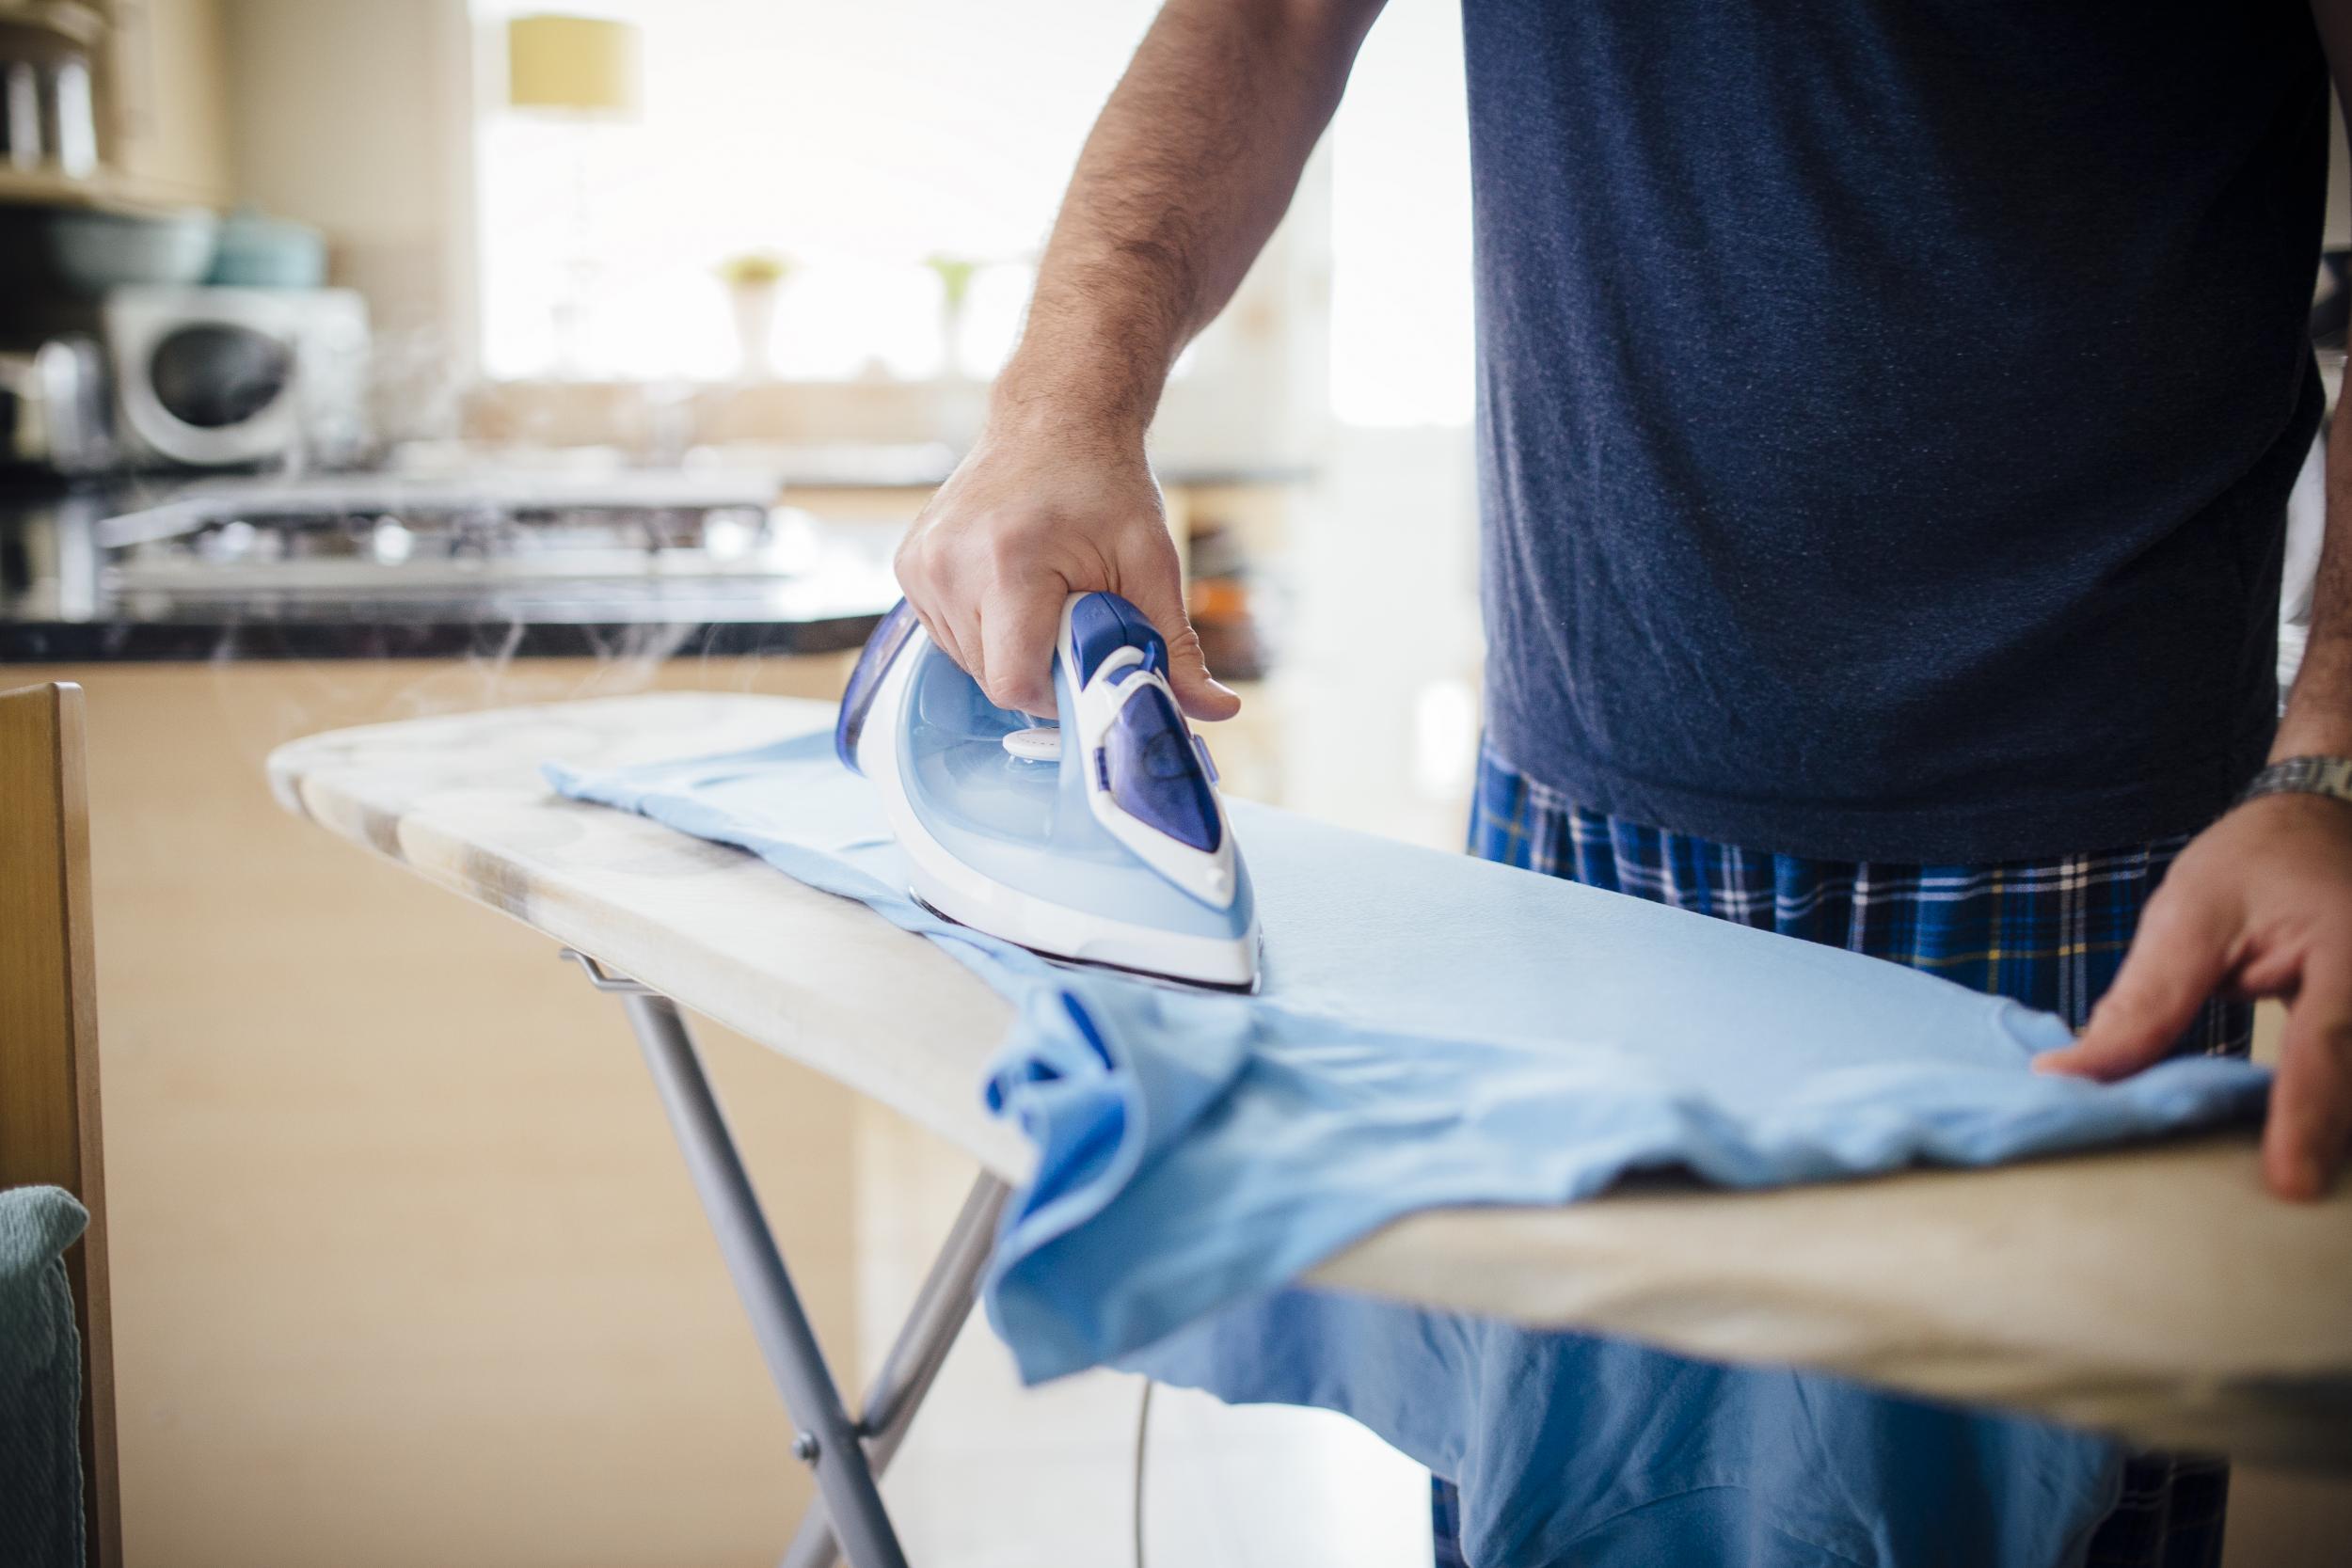 Always iron before a date as wrinkled clothes are a big turn-off